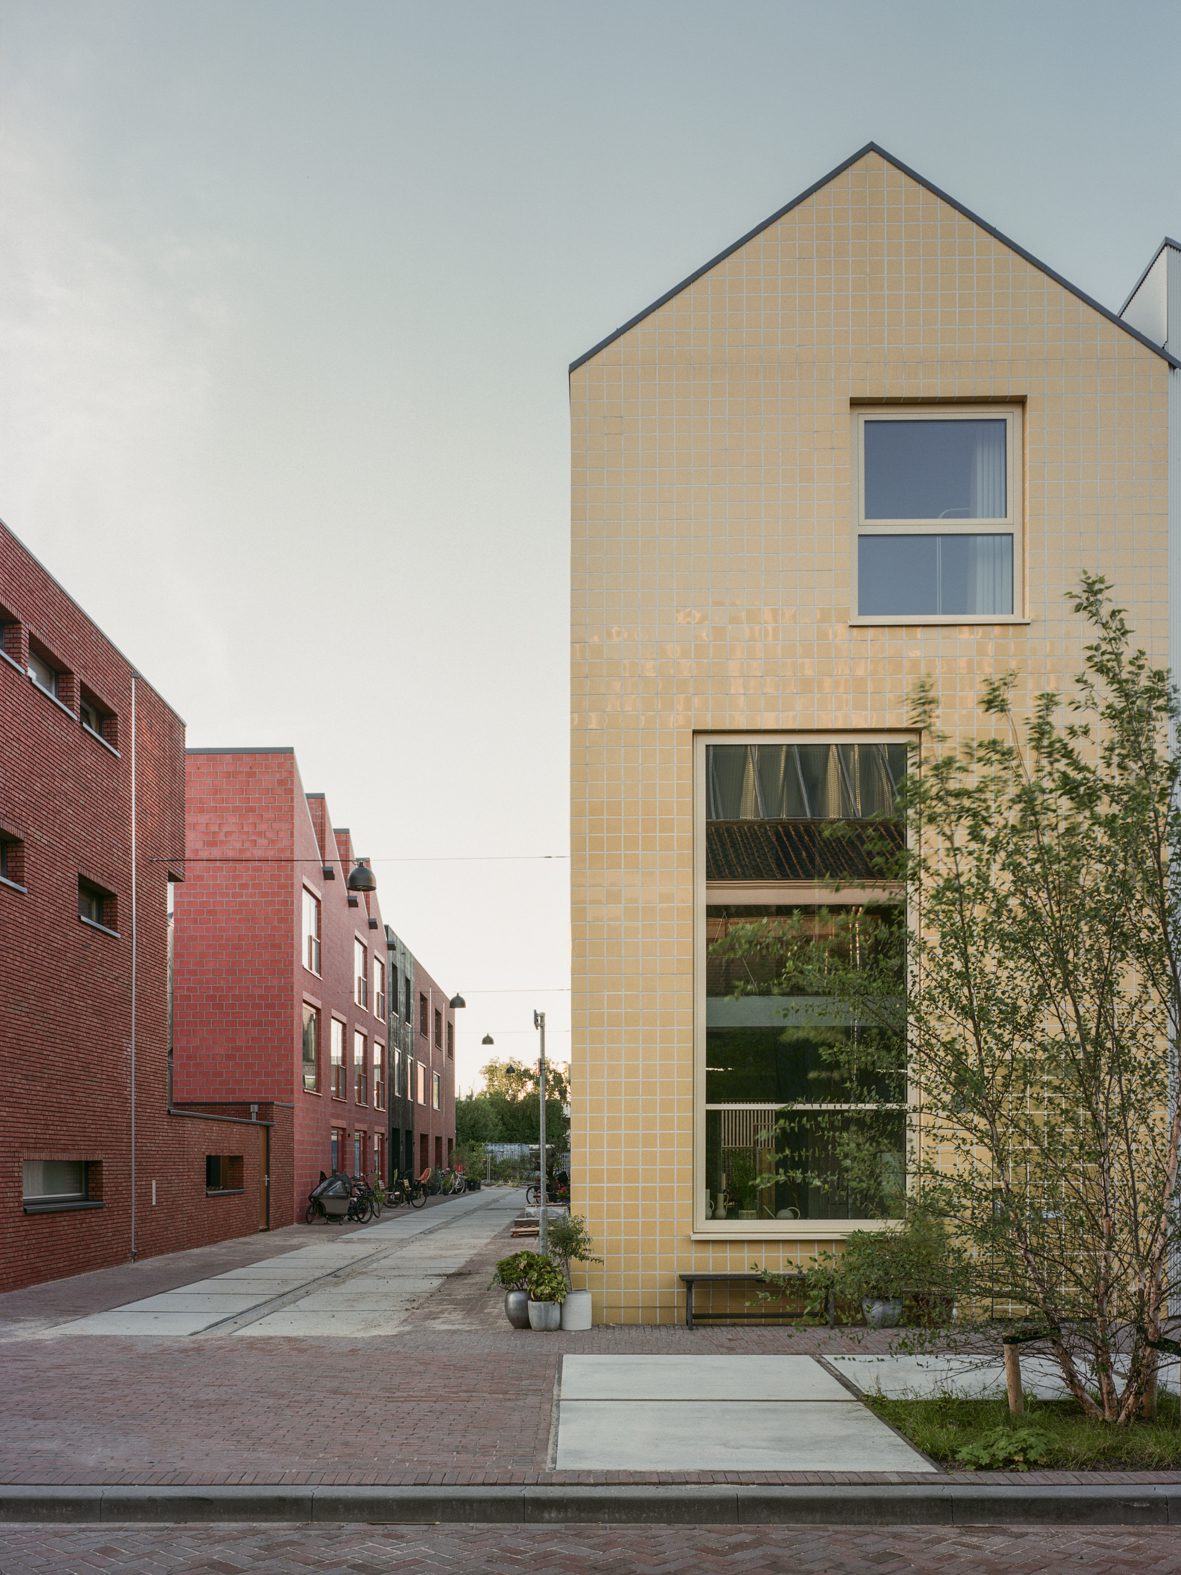 Wisselspoor - Wisselspoor yellow tile terraced house - a project by Space Encounters Office for Architecture